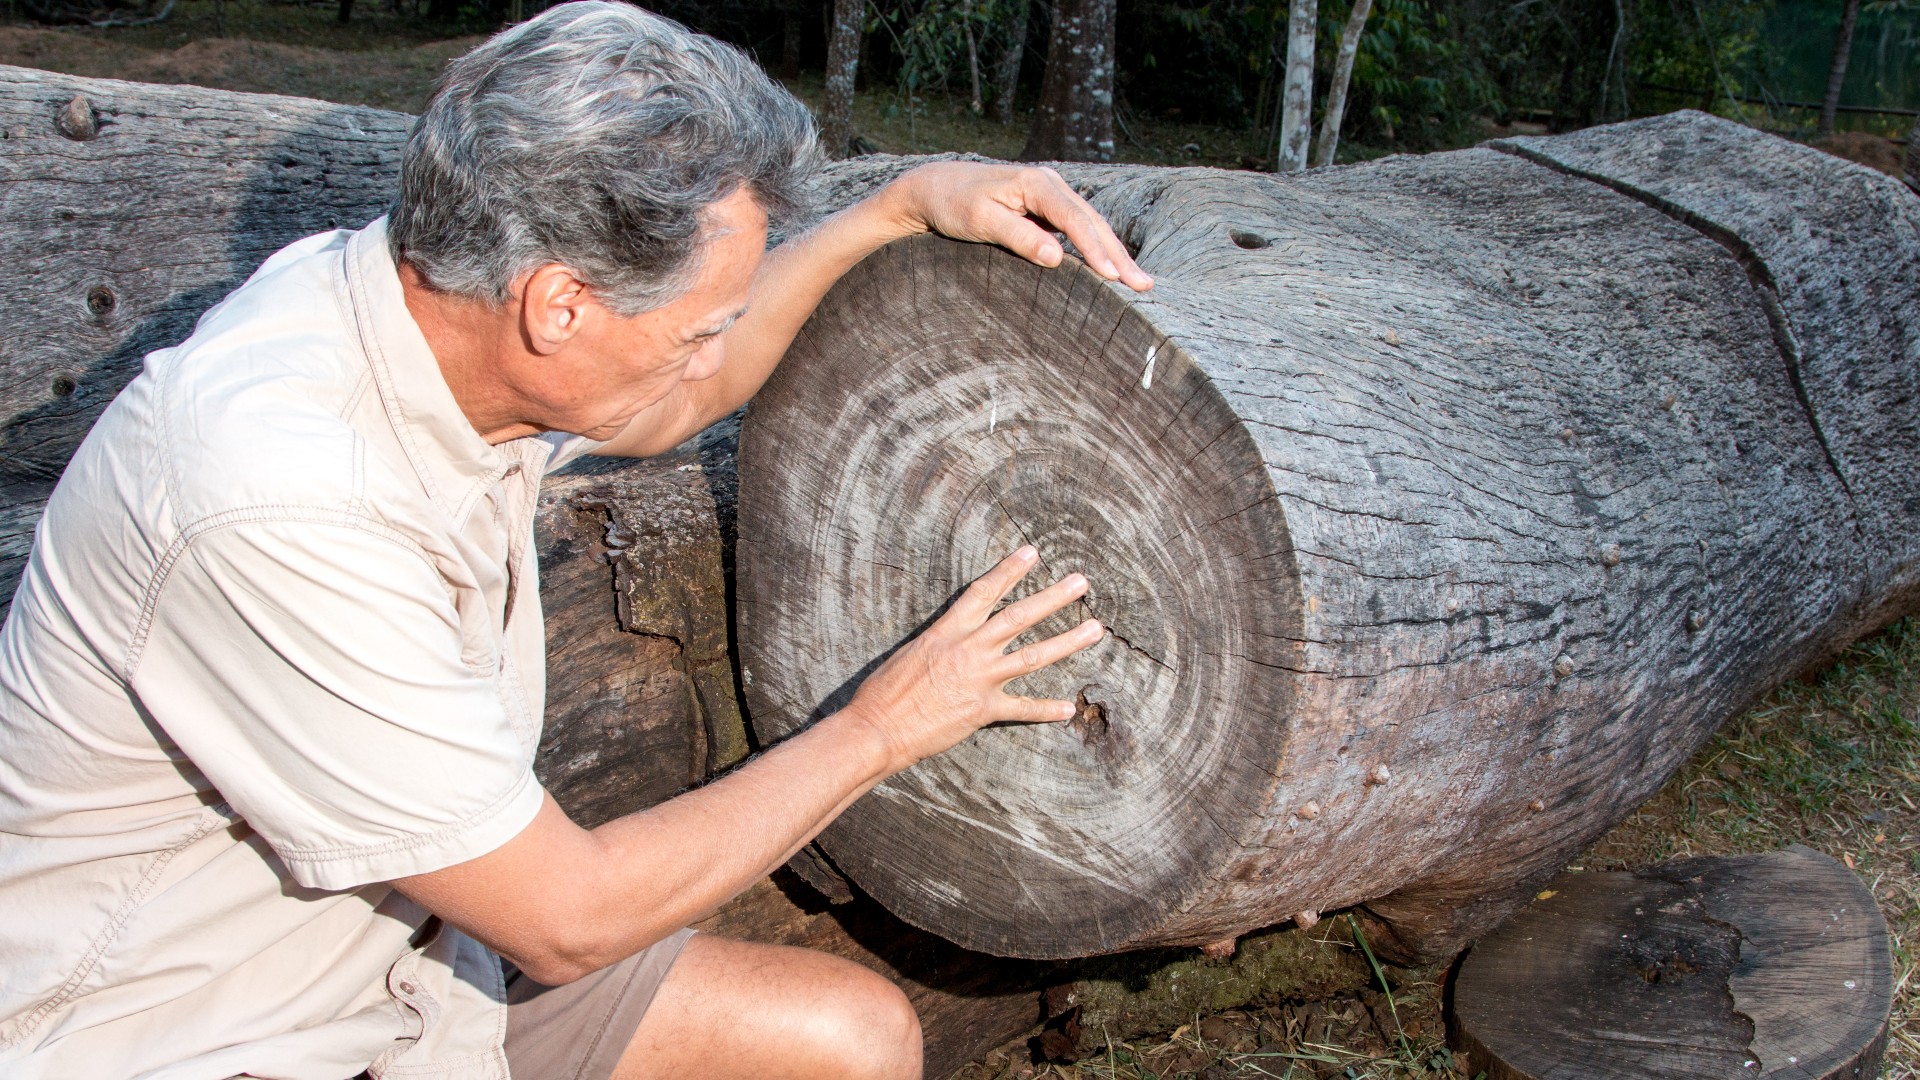 Here we see a man inspecting the rings of a tree that has been felled to find out the age of the tree.